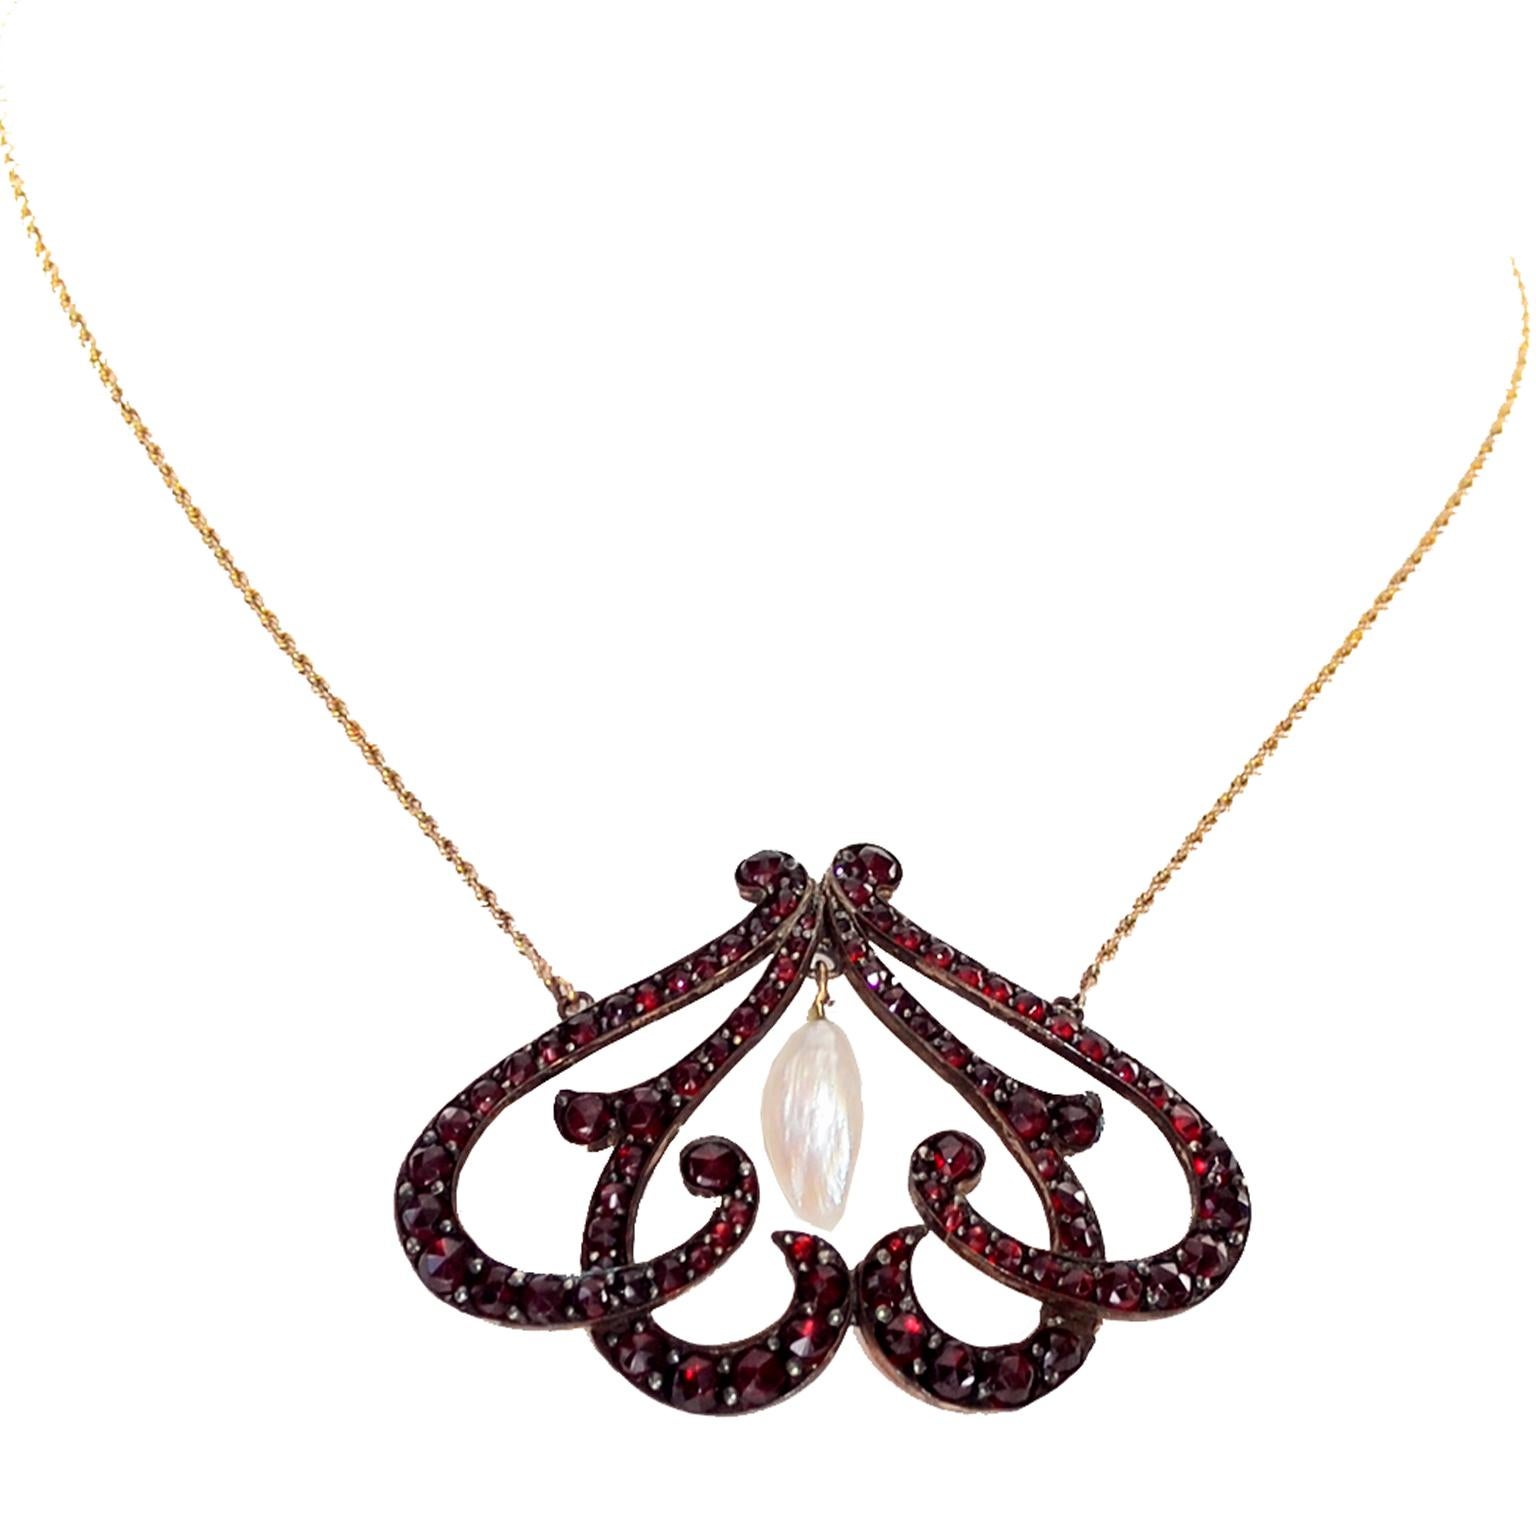 This is a lovely Victorian era bohemian garnet necklace that has a very unique flourish pendant with single pearl drop in the center. The pendant is attached to a gold filled chain. The necklace has an insert clasp and the pendant measures 1.5